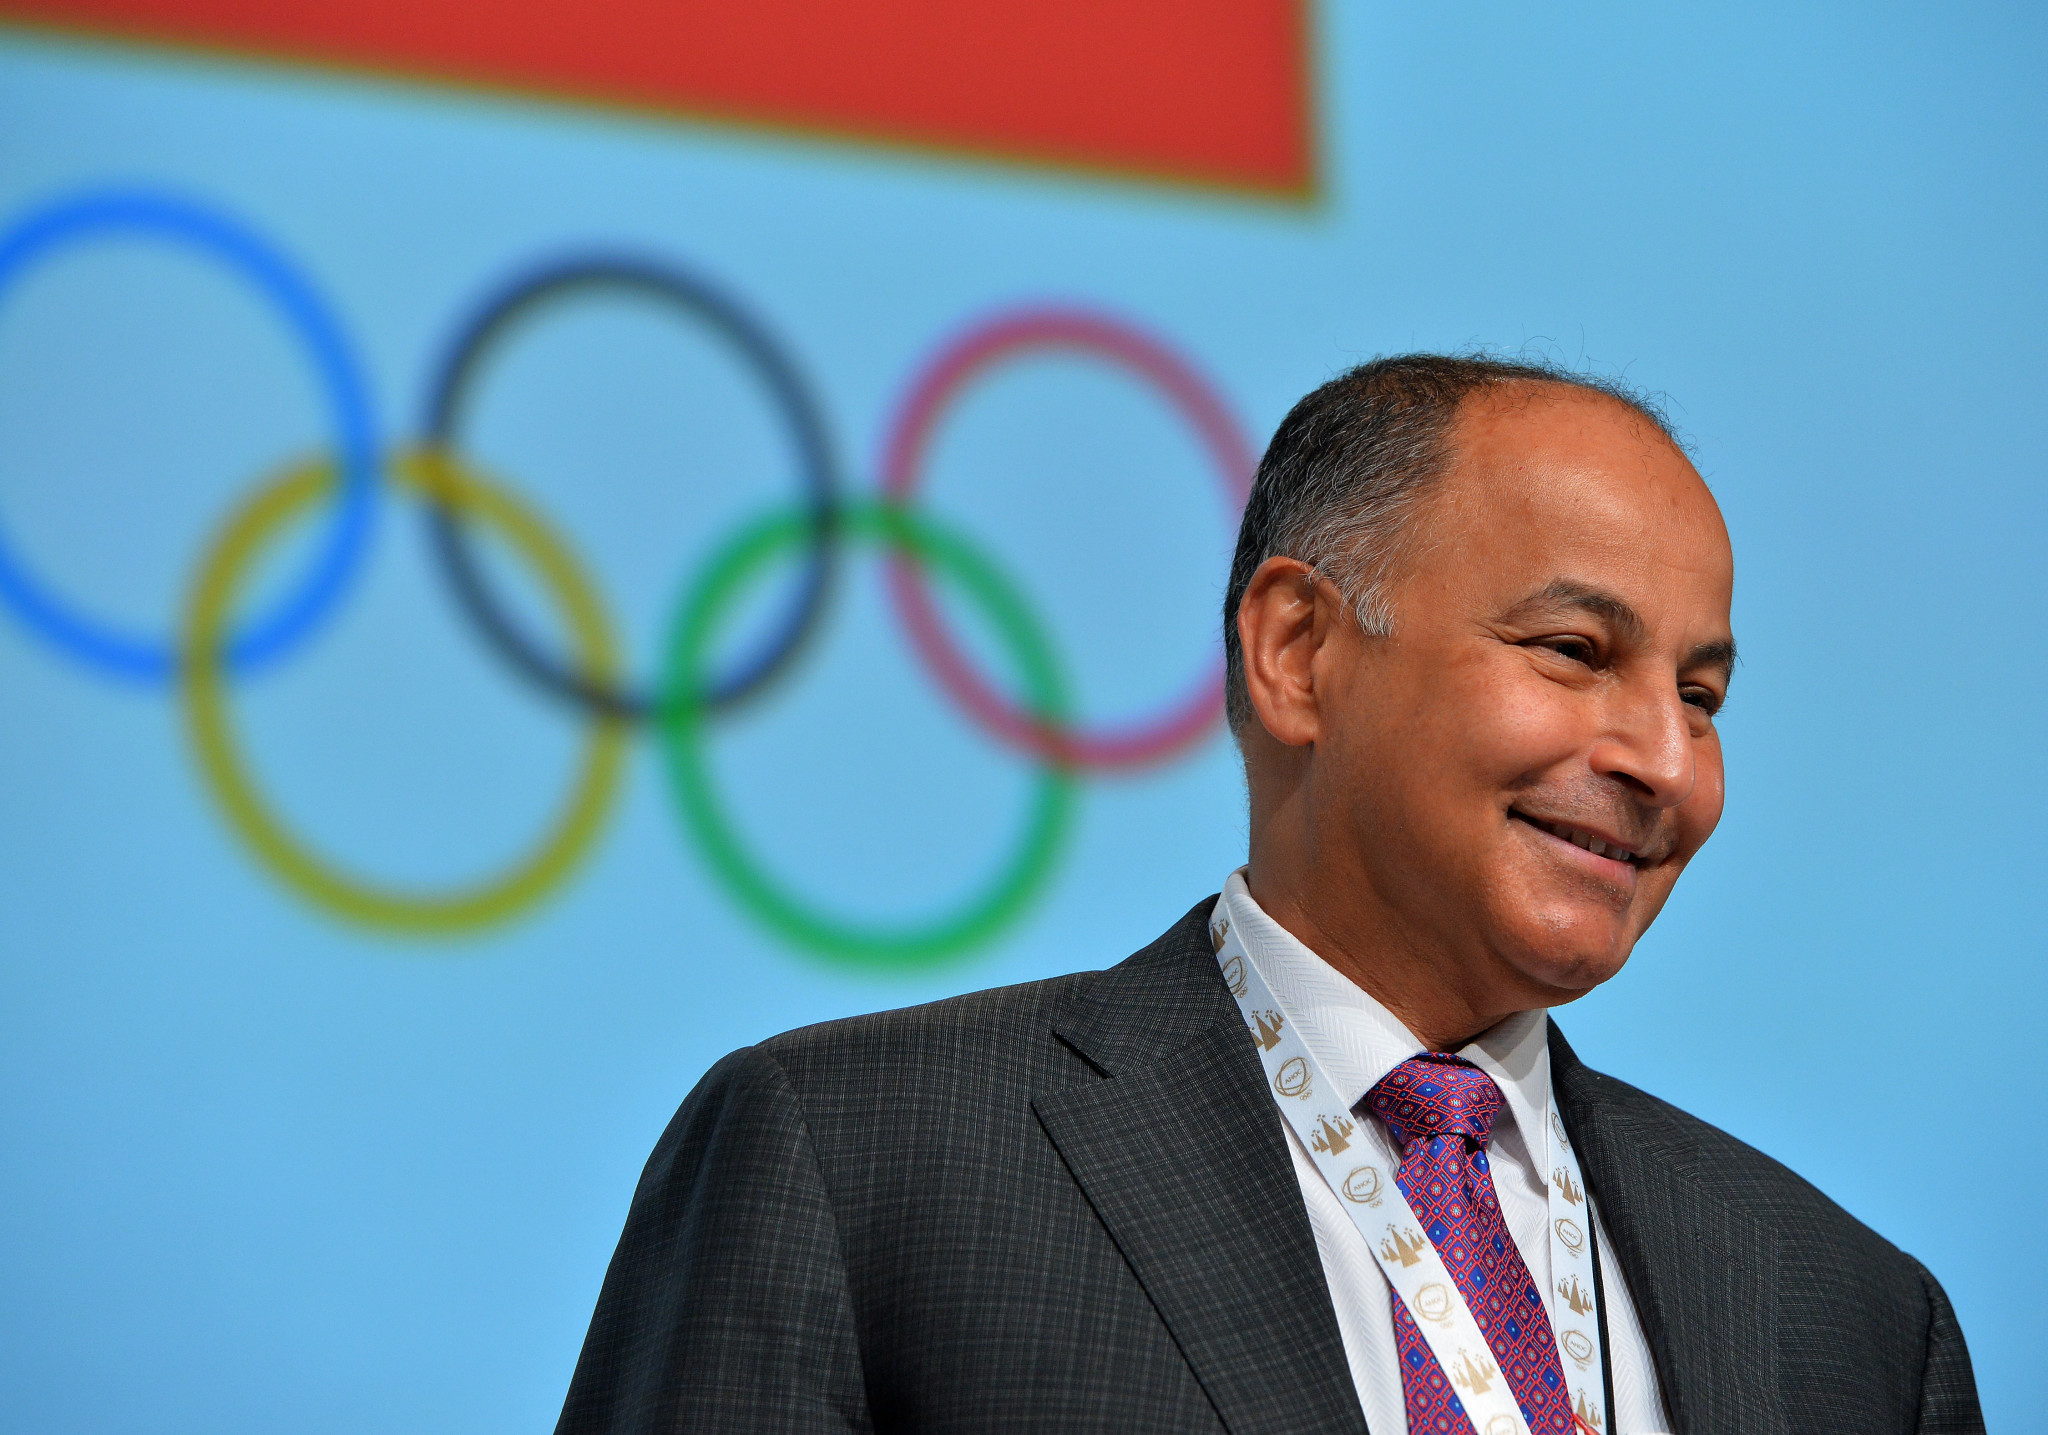 Husain Al-Musallam has served as director general of the Olympic Council of Asia since 2005 ©Getty Images